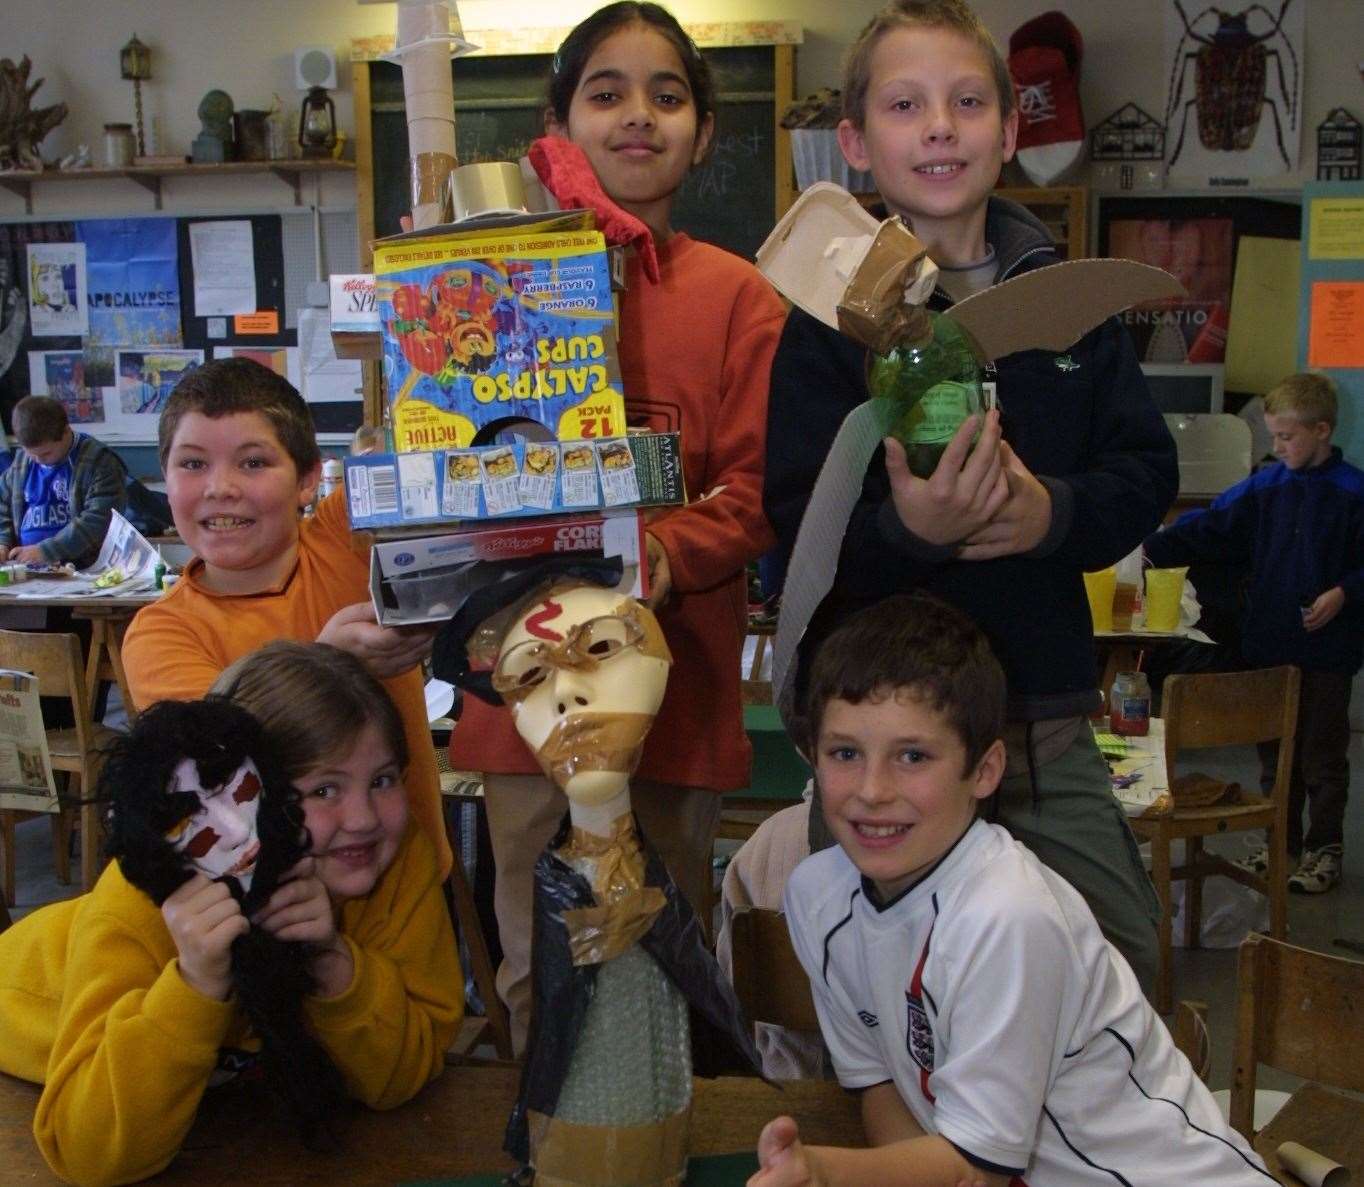 Olivia Young, Ashley West, Jamie Sullivan, Raj Haq and Elliot Goodrich show off their Harry Potter creations from a Harry Potter class at the Kent Children's University at the Invicta Grammar School